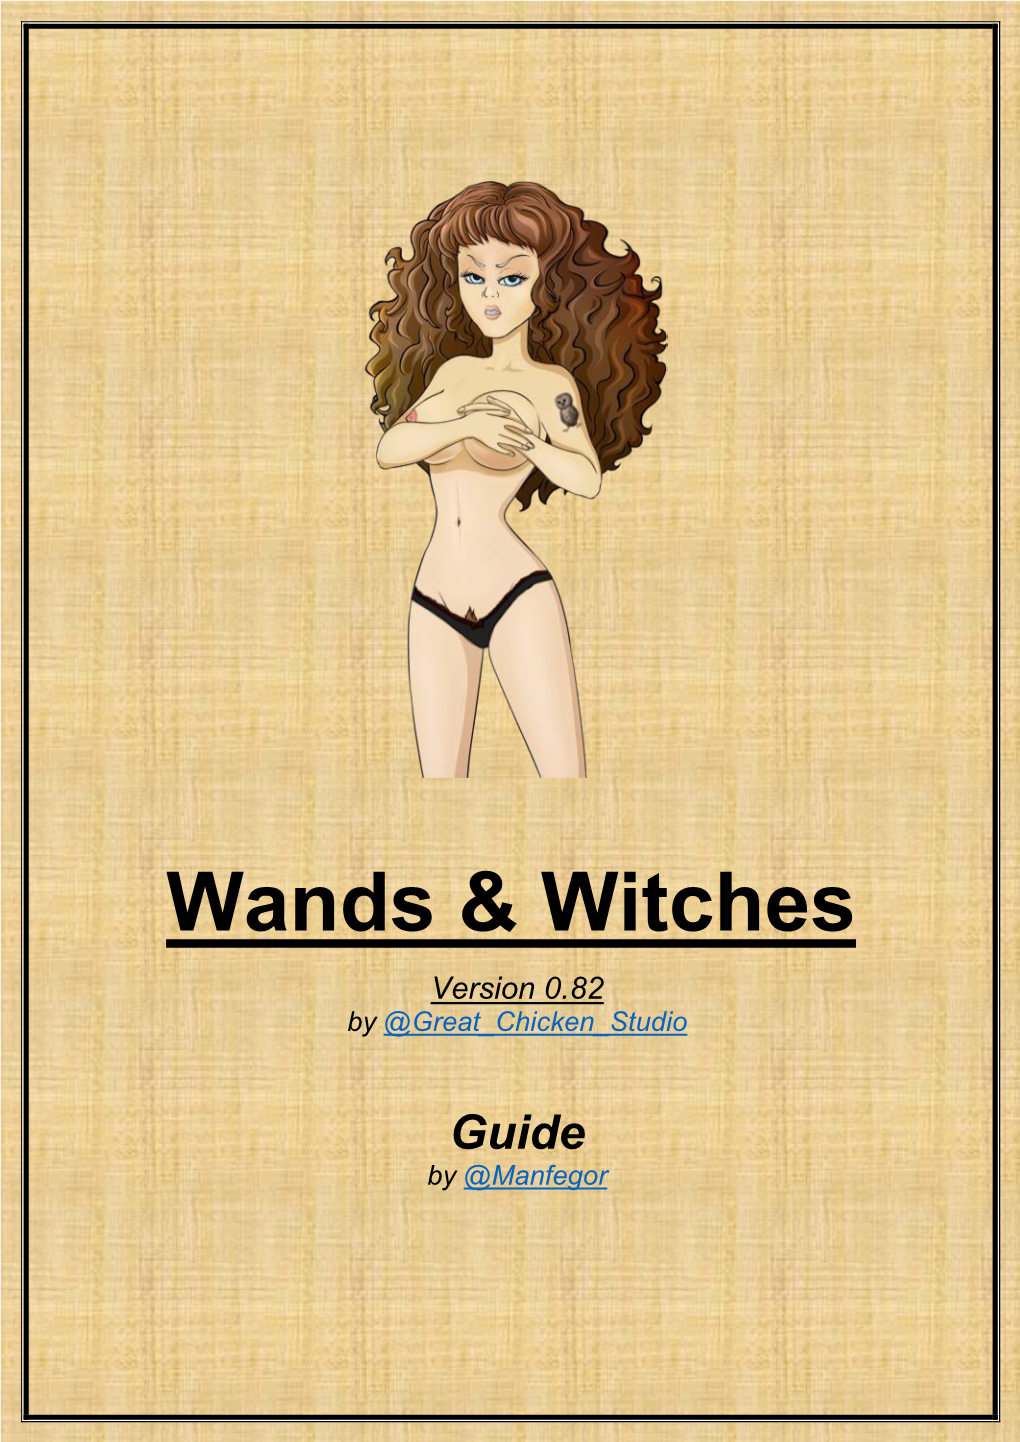 Wands & Witches